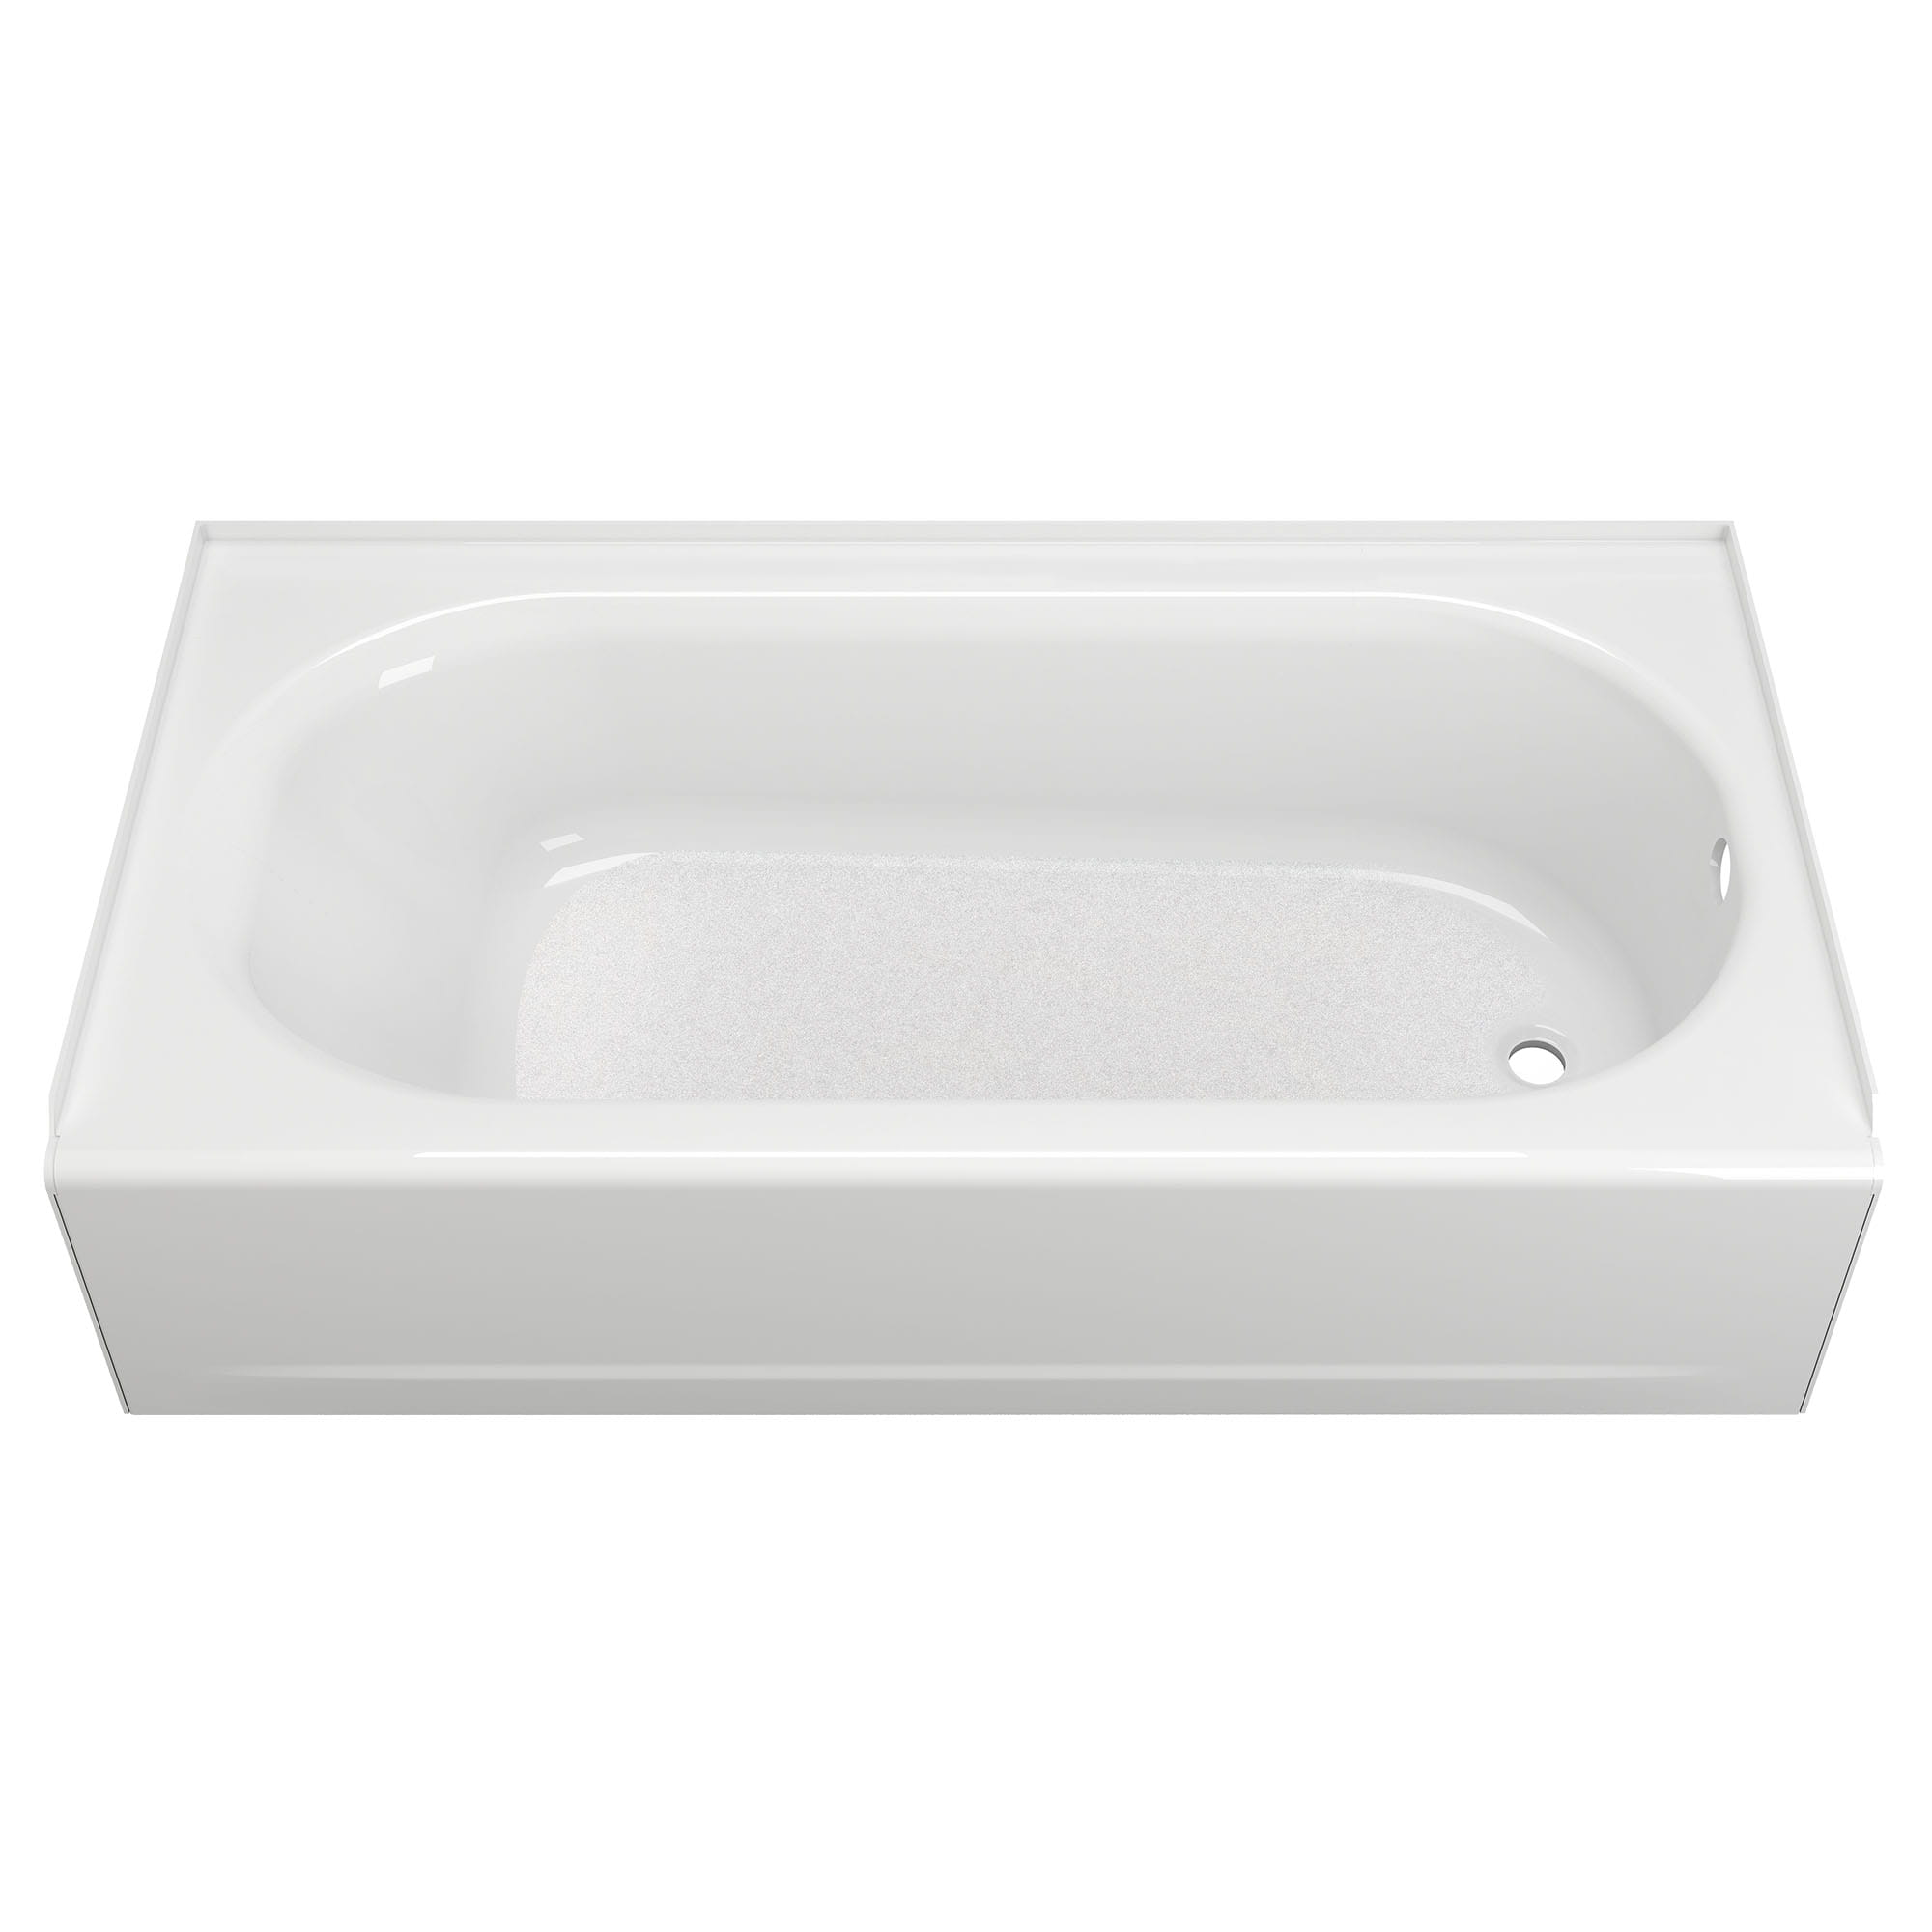 Princeton Americast 60 x 34 Inch Integral Apron Bathtub Above Floor Rough Right Hand Outlet with Luxury Ledge WHITE